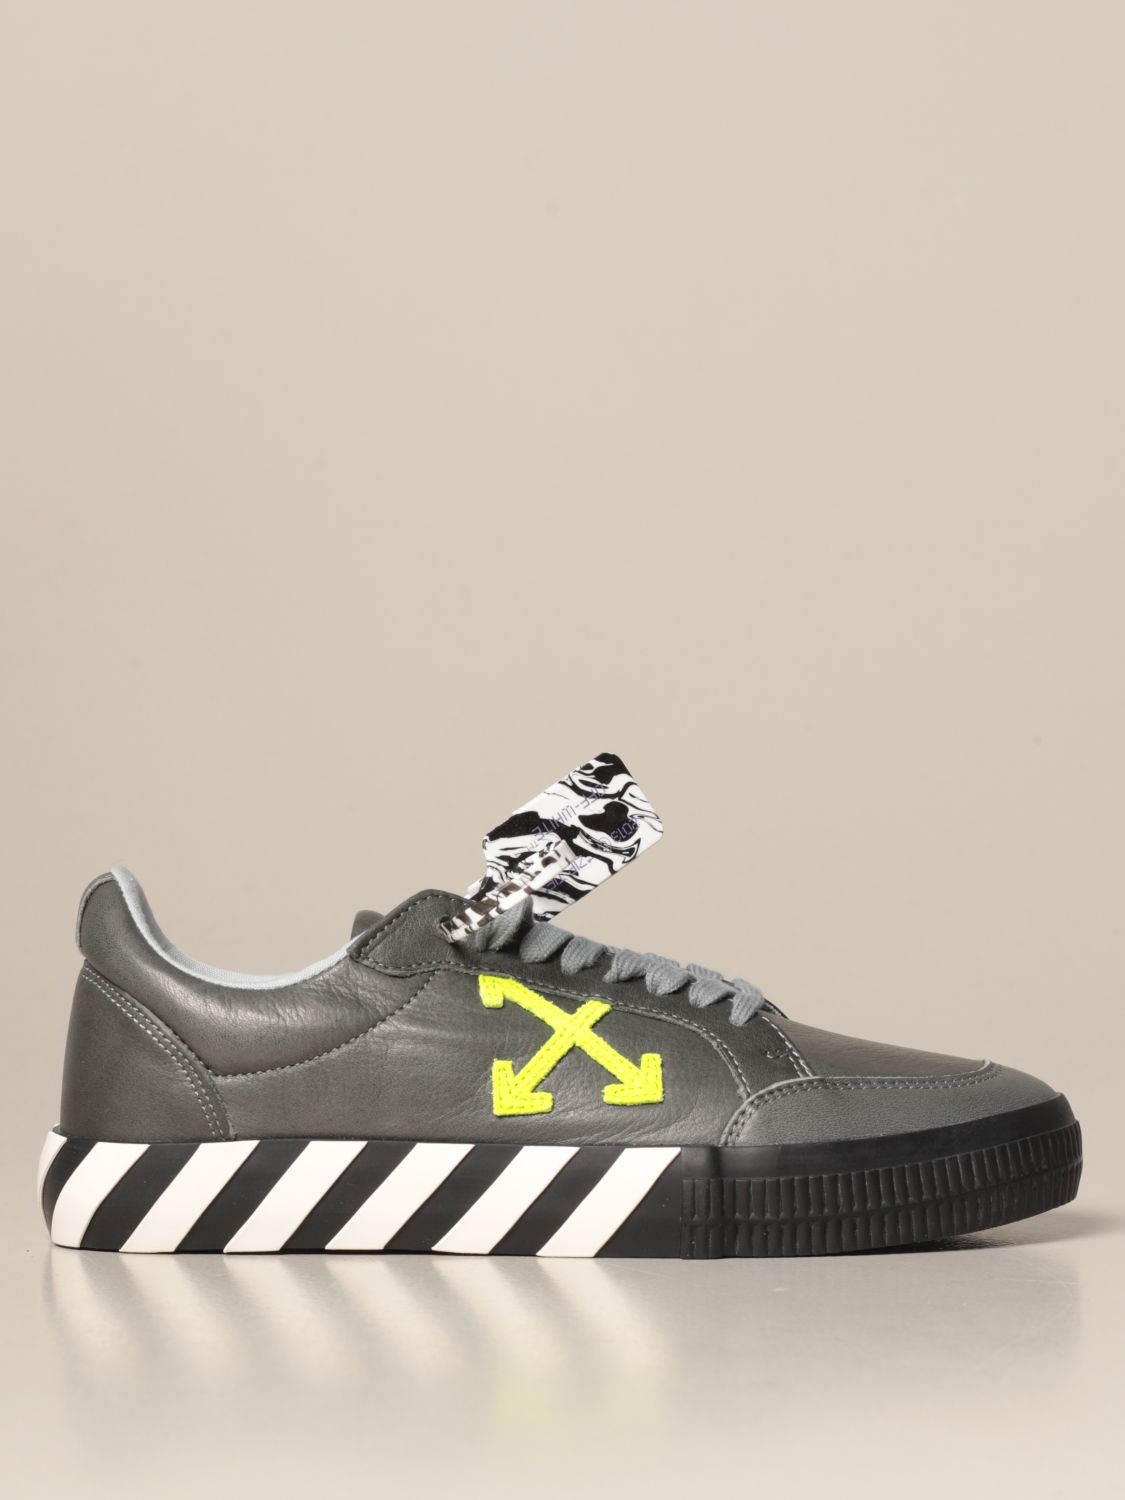 off white grey sneakers